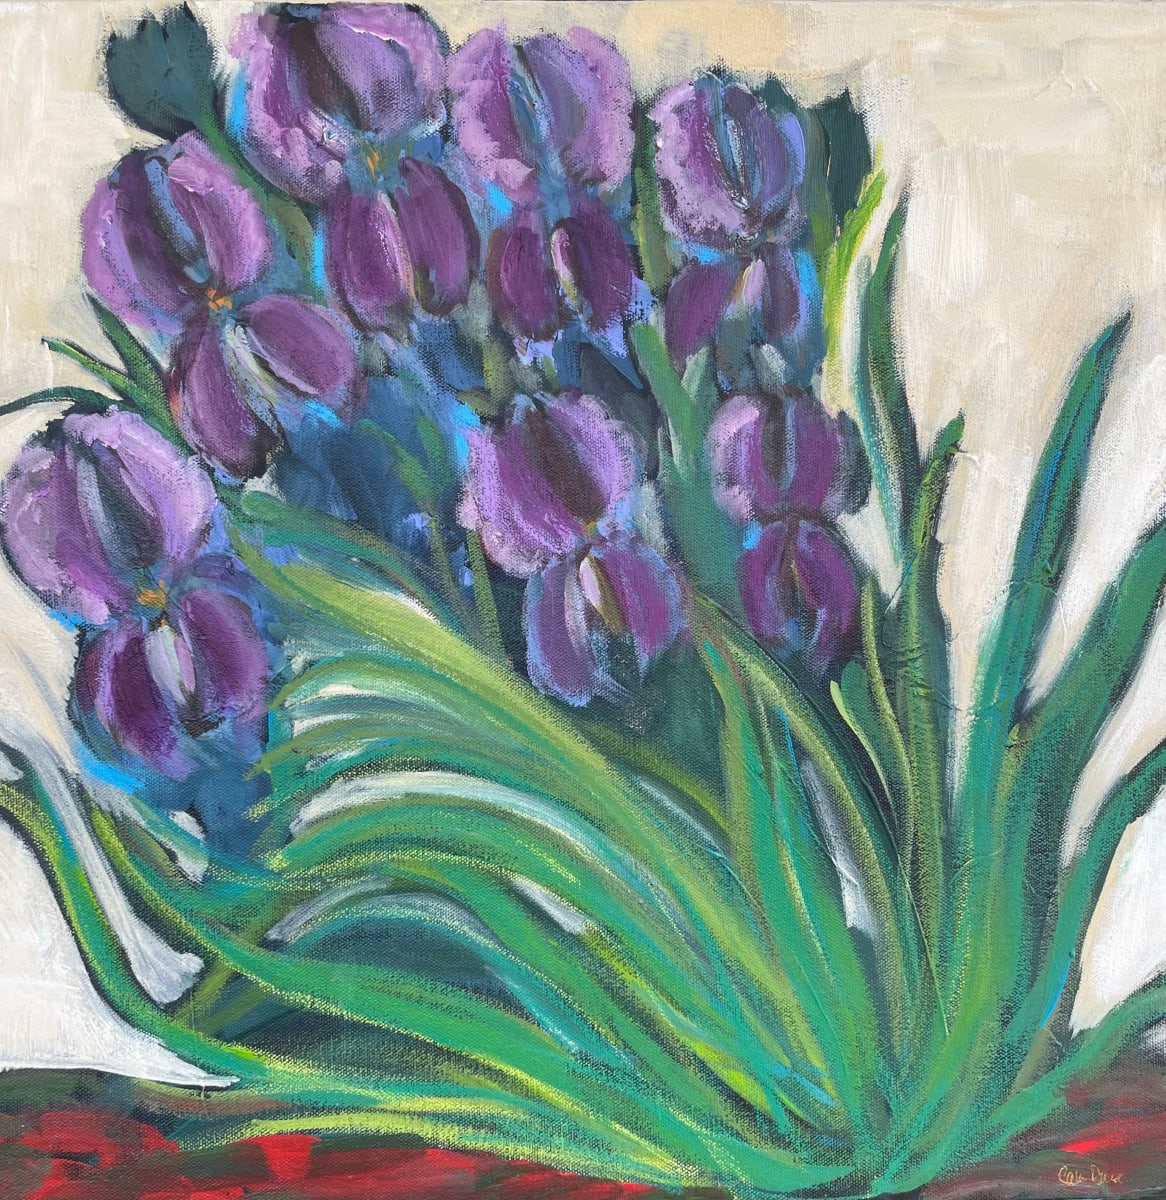 Flowers for Vincent by Carmen Duran  Image: Acrylic painting with colored pencil and oil pastels.